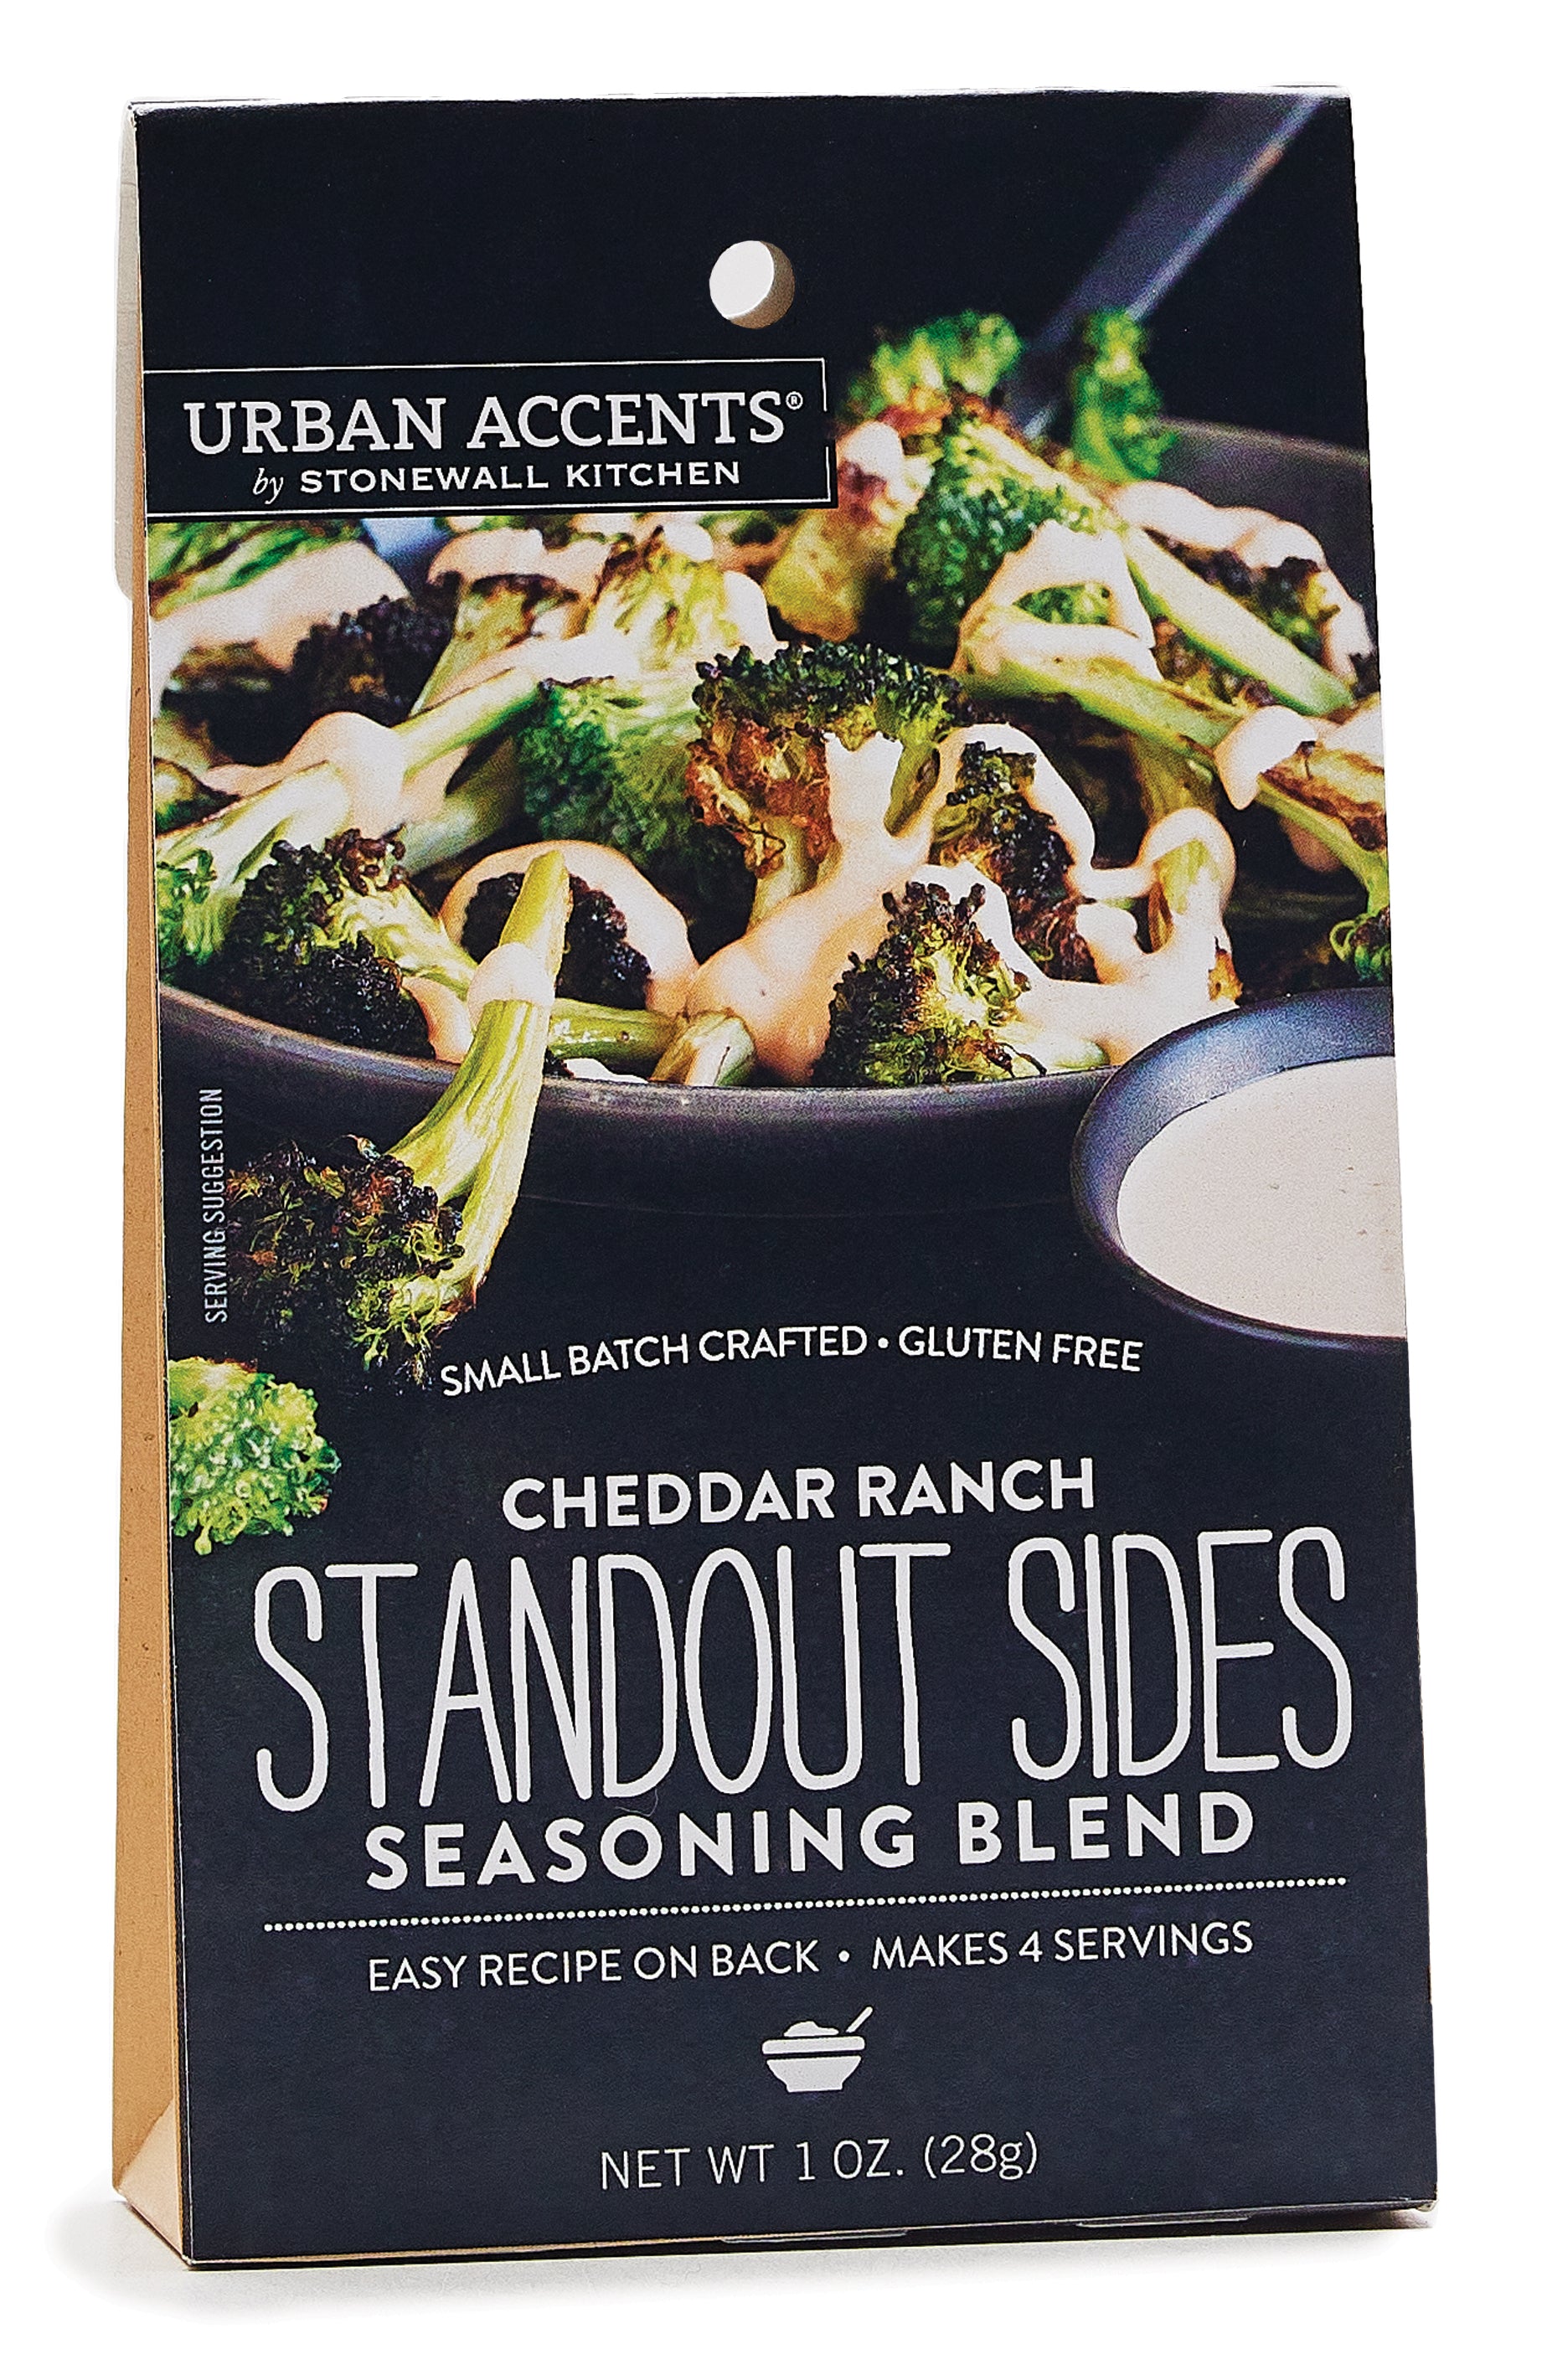 Urban Accents Cheddar Ranch Standout Sides Seasoning Blend - Olive Oil Etcetera 